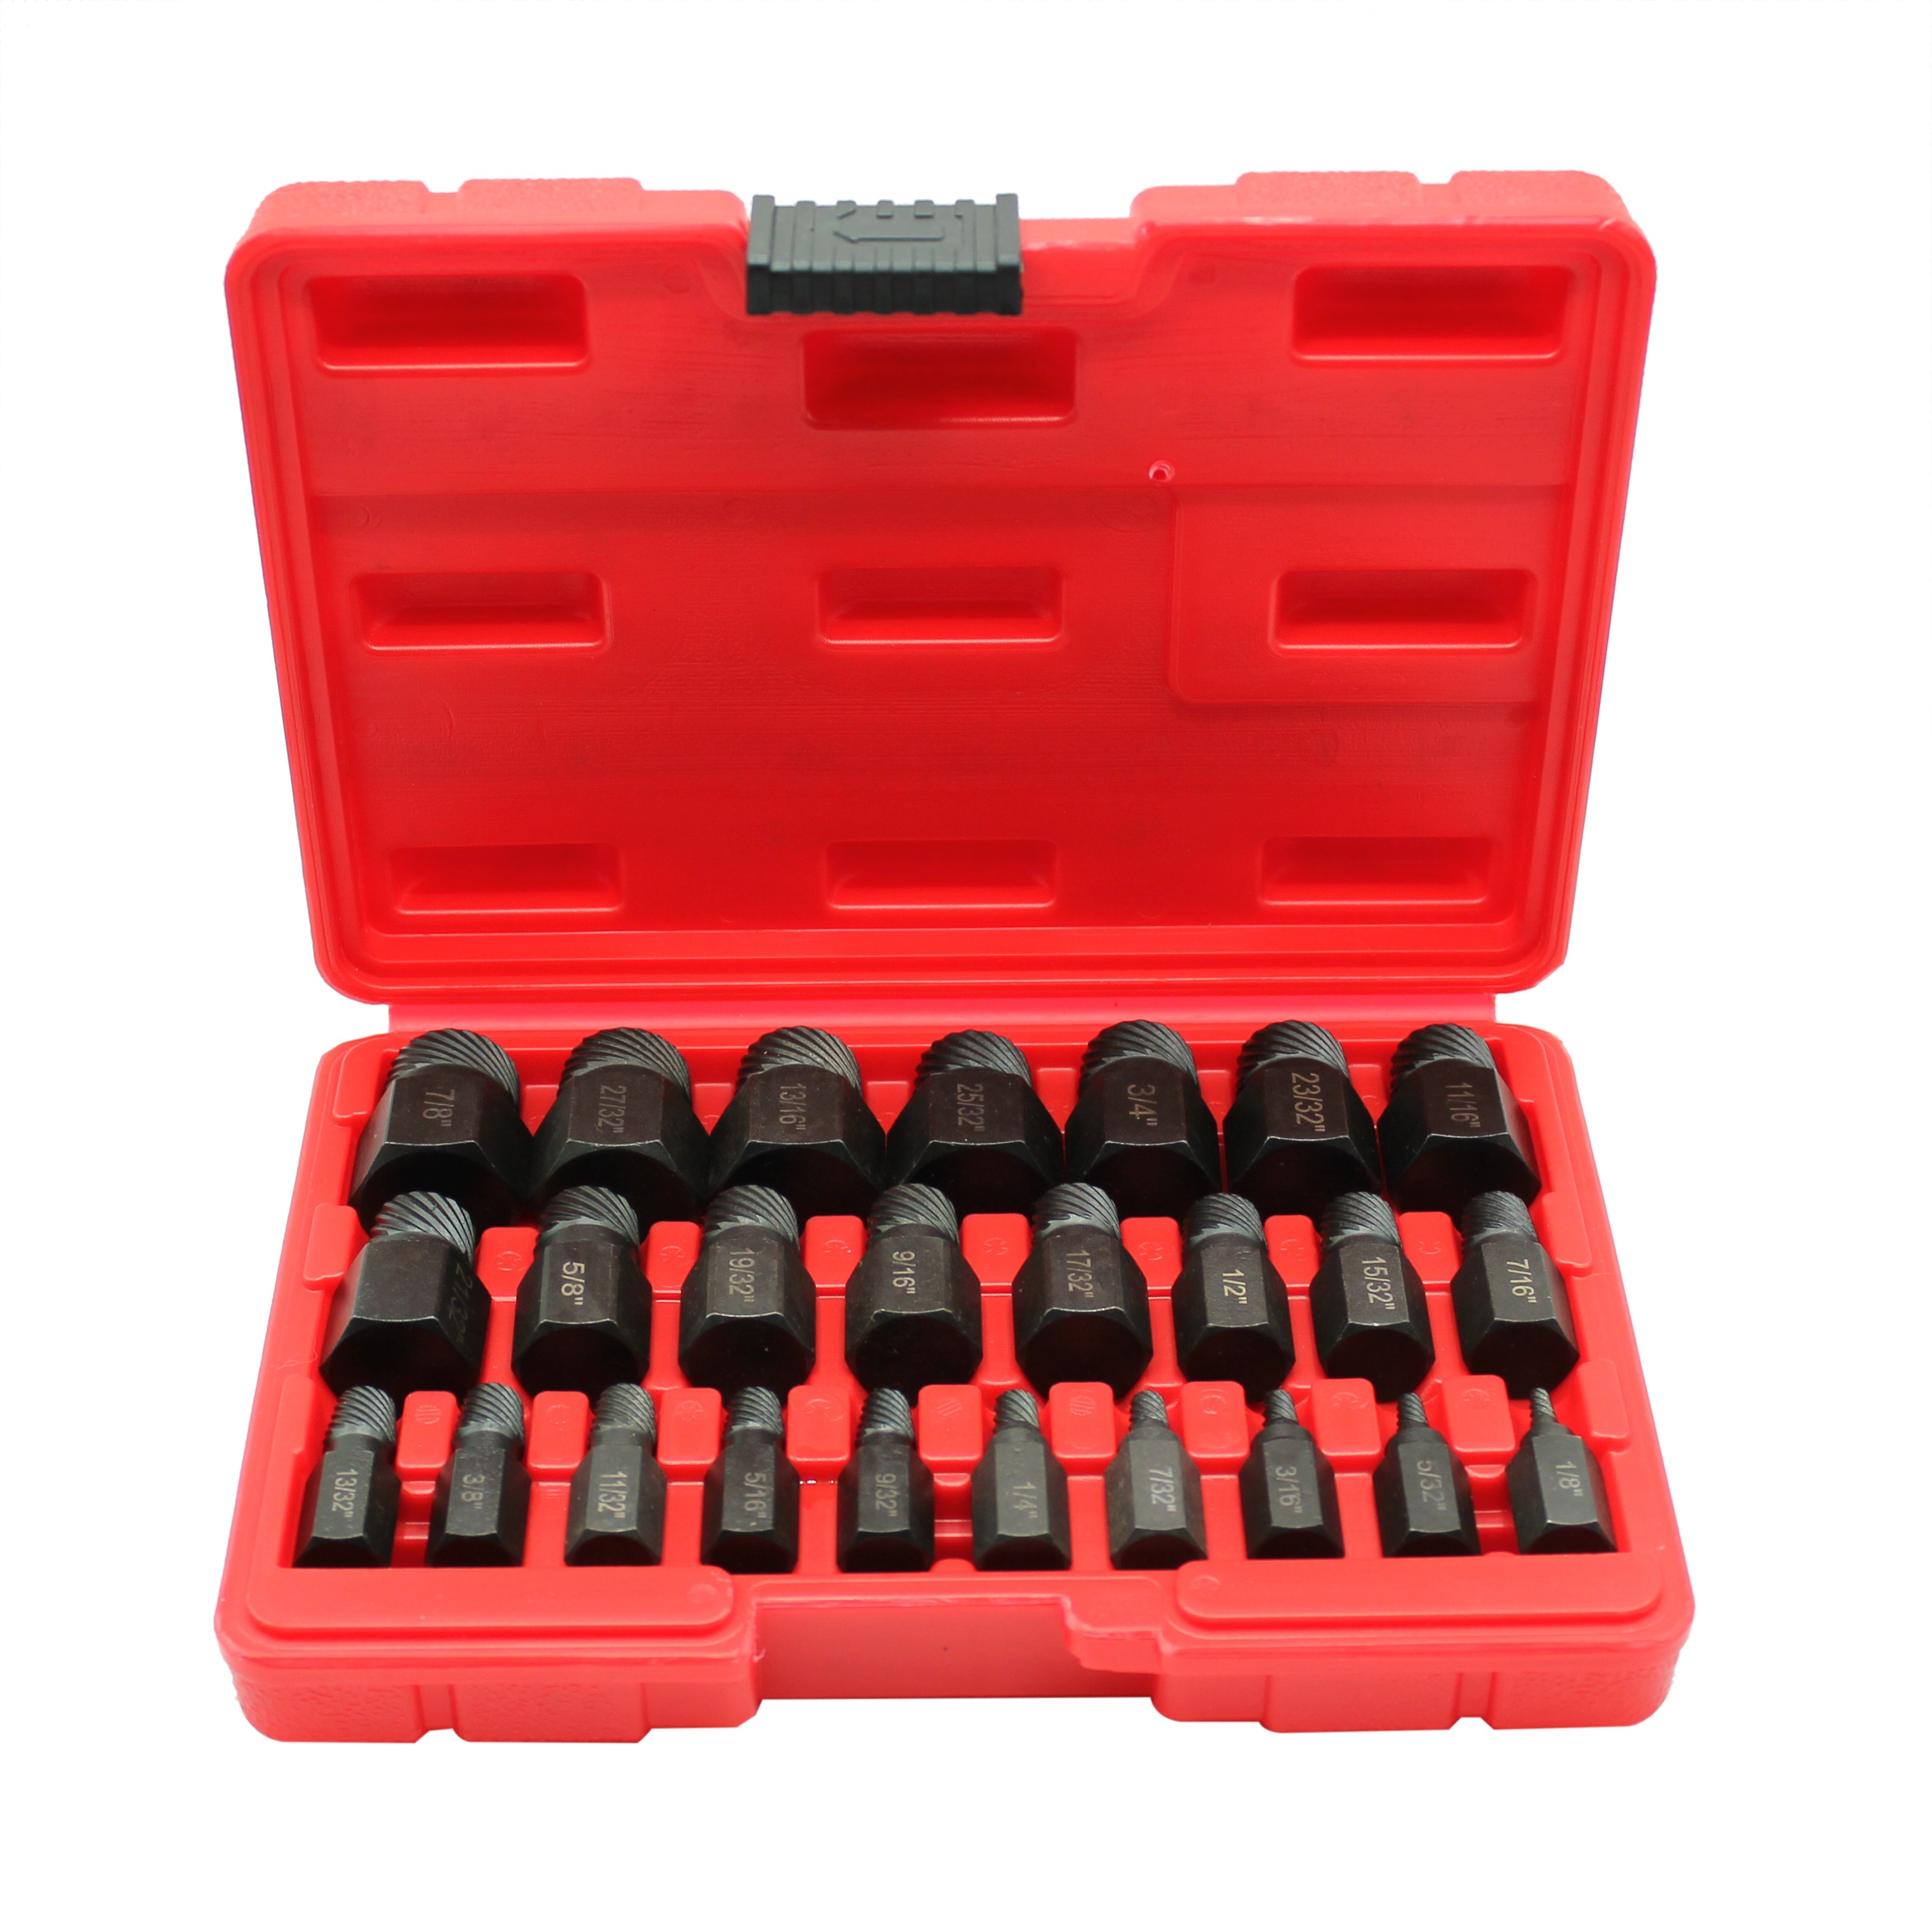 

25pcs Steel Durable Screw Extractor Set, Easily Remove Damaged Bolts & Screws